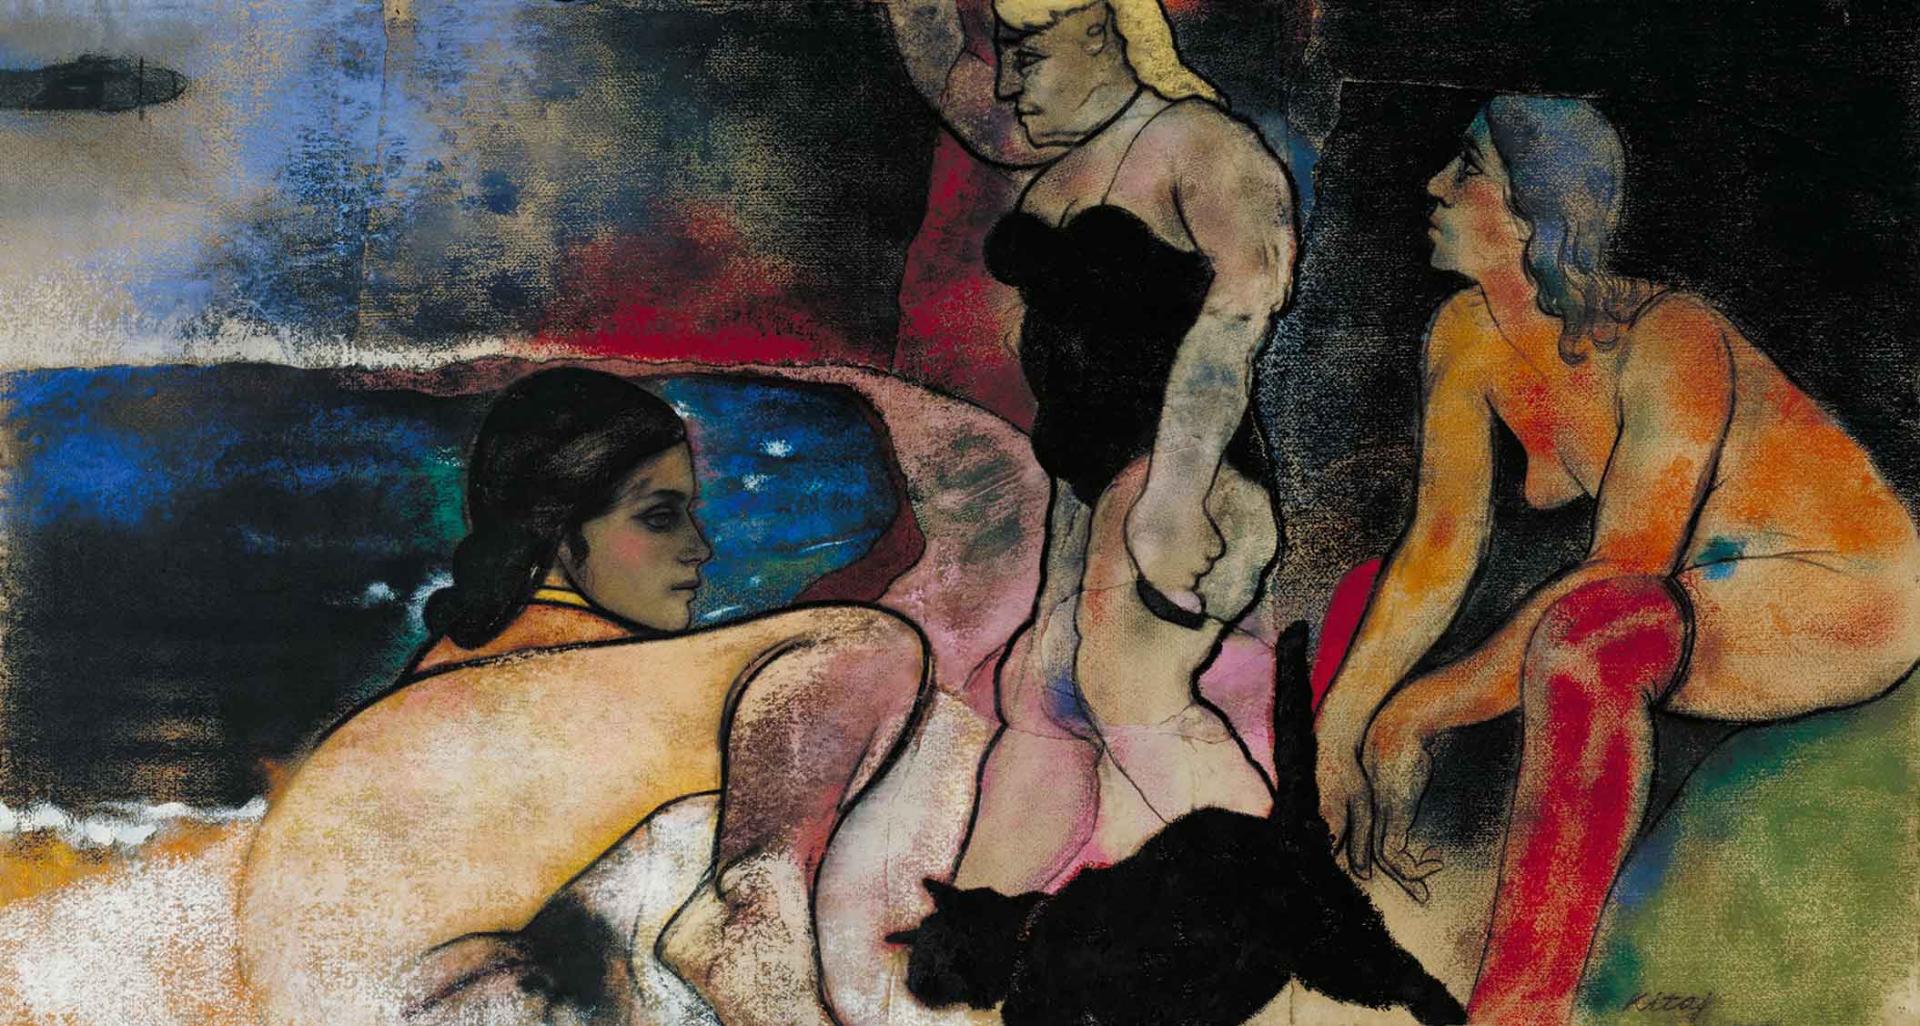 Colorful painting of three women and a black cat next to a body of water